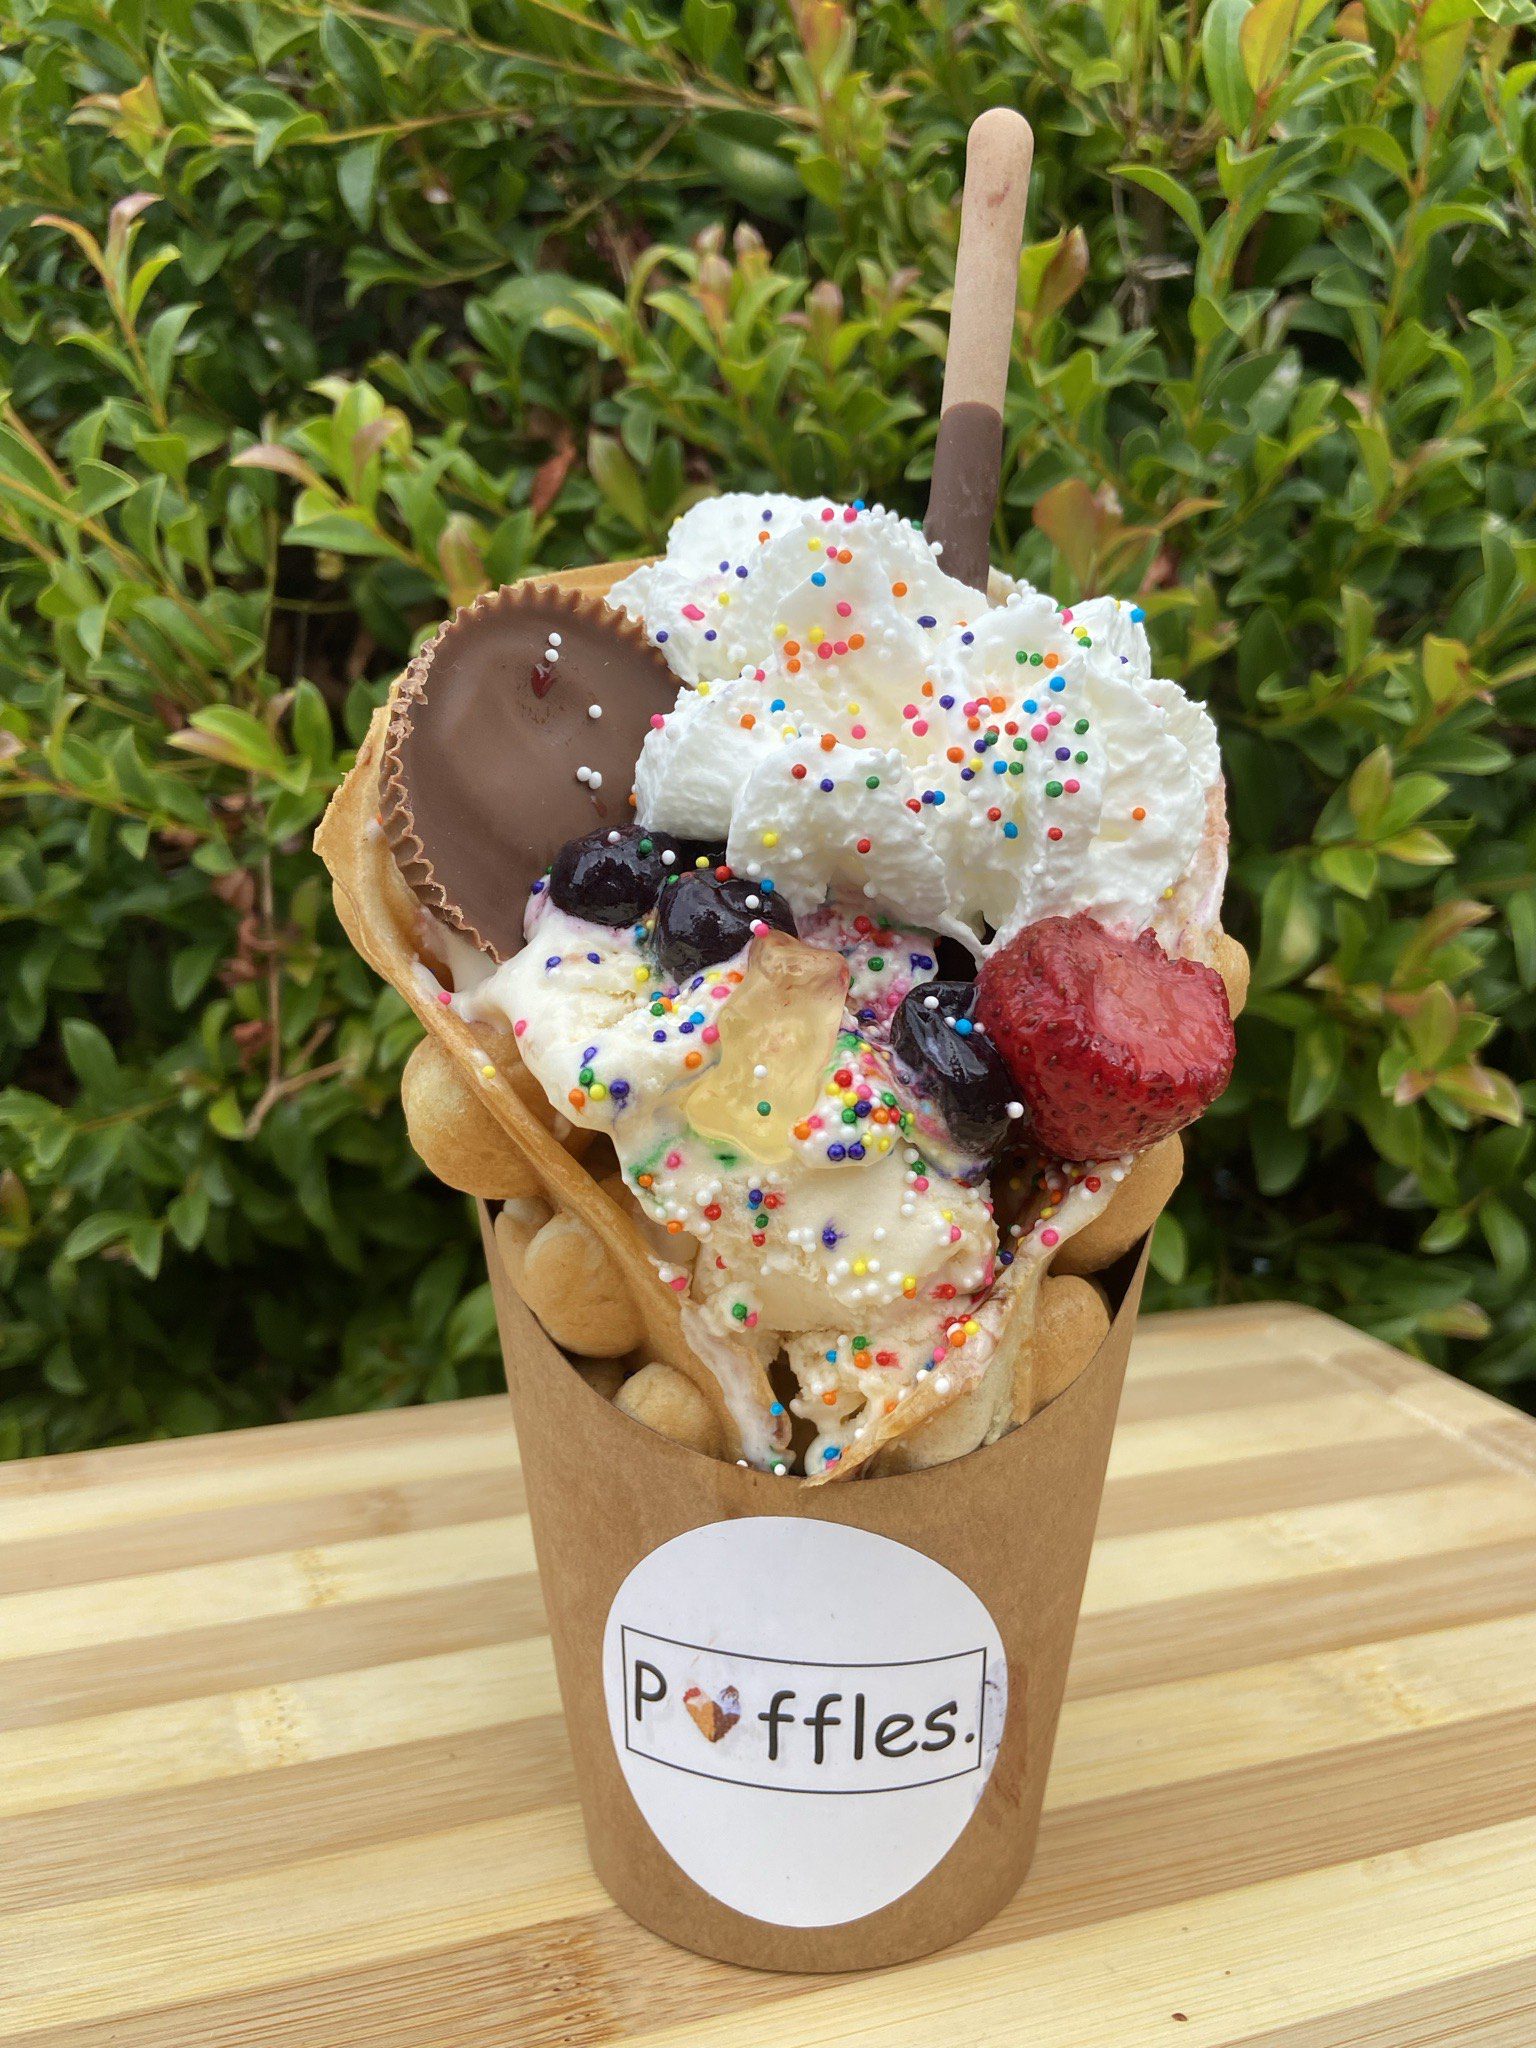 Puffy waffle cone full of ice cream and covered in a variety of colorful toppings.